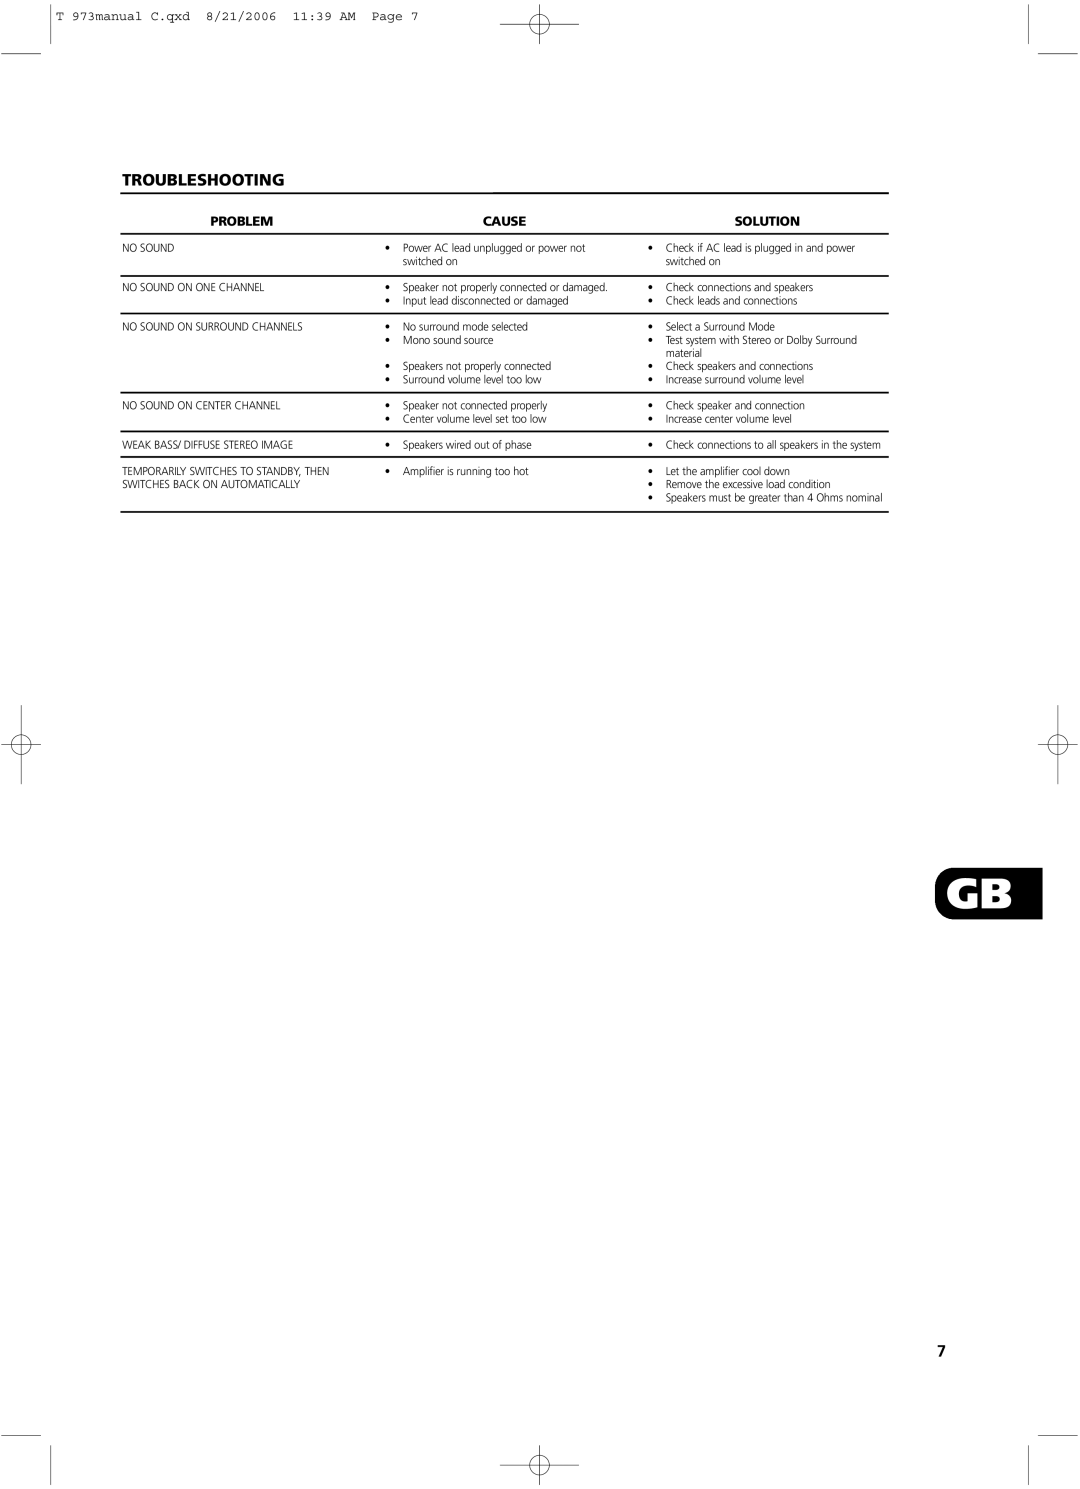 NAD owner manual Troubleshooting, Problem, Cause, Solution, T 973manual C.qxd 8/21/2006 11:39 AM Page 